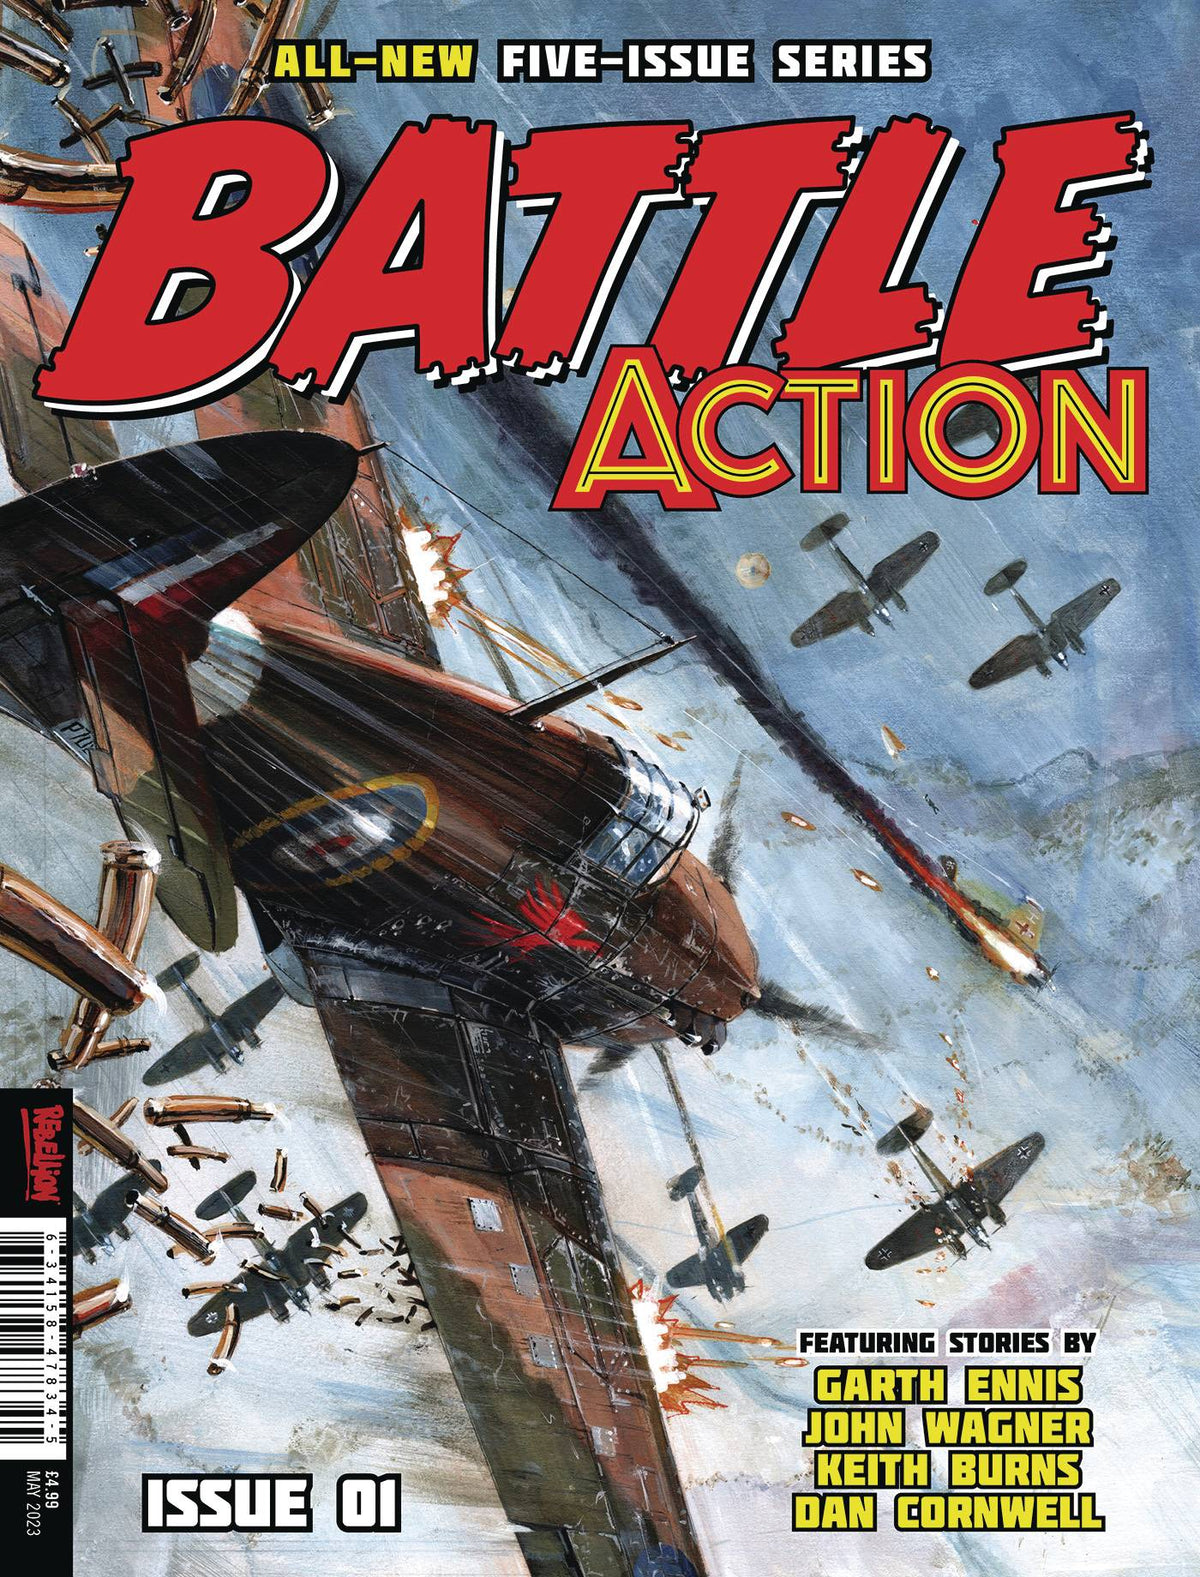 BATTLE ACTION #1 (OF 5) [SIGNED BY GARTH ENNIS]